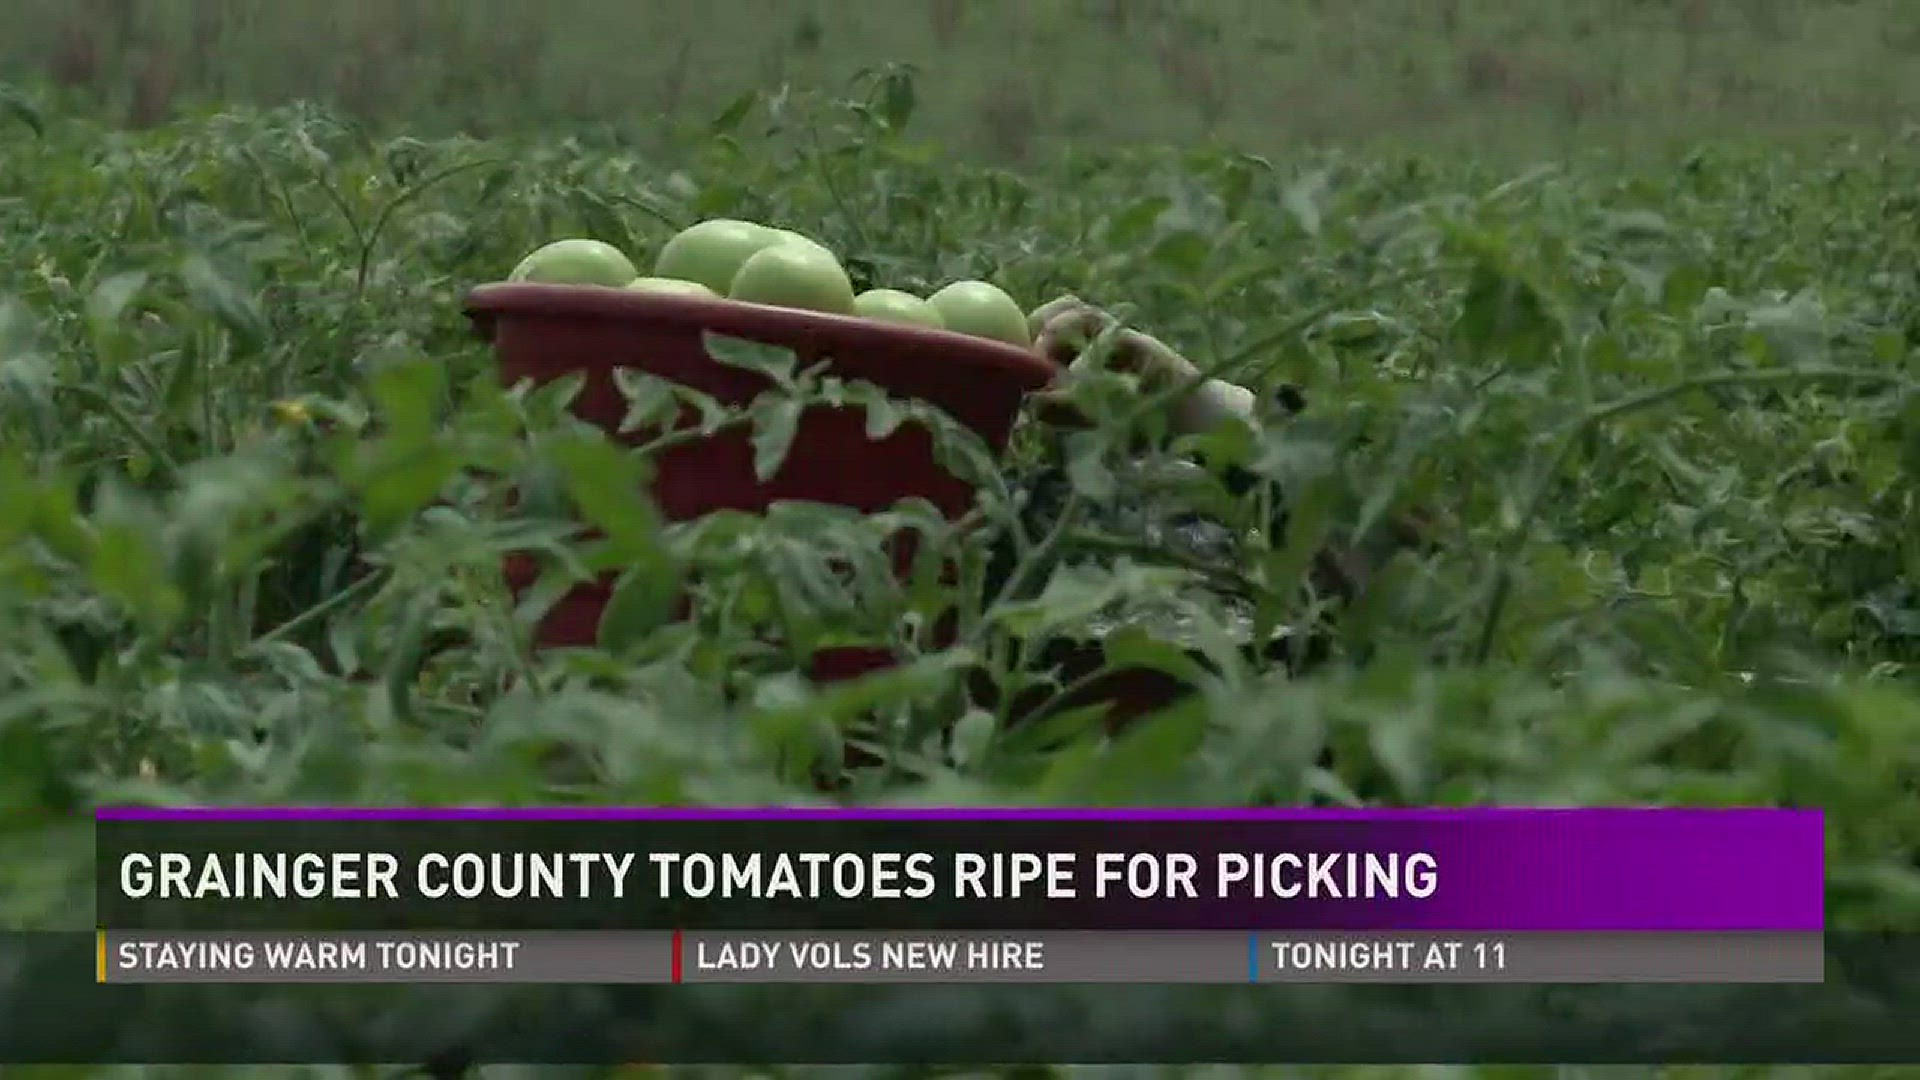 July 20, 2017: Longmire Farms in Grainger County says it's been a good year for their acres of tomato crops.